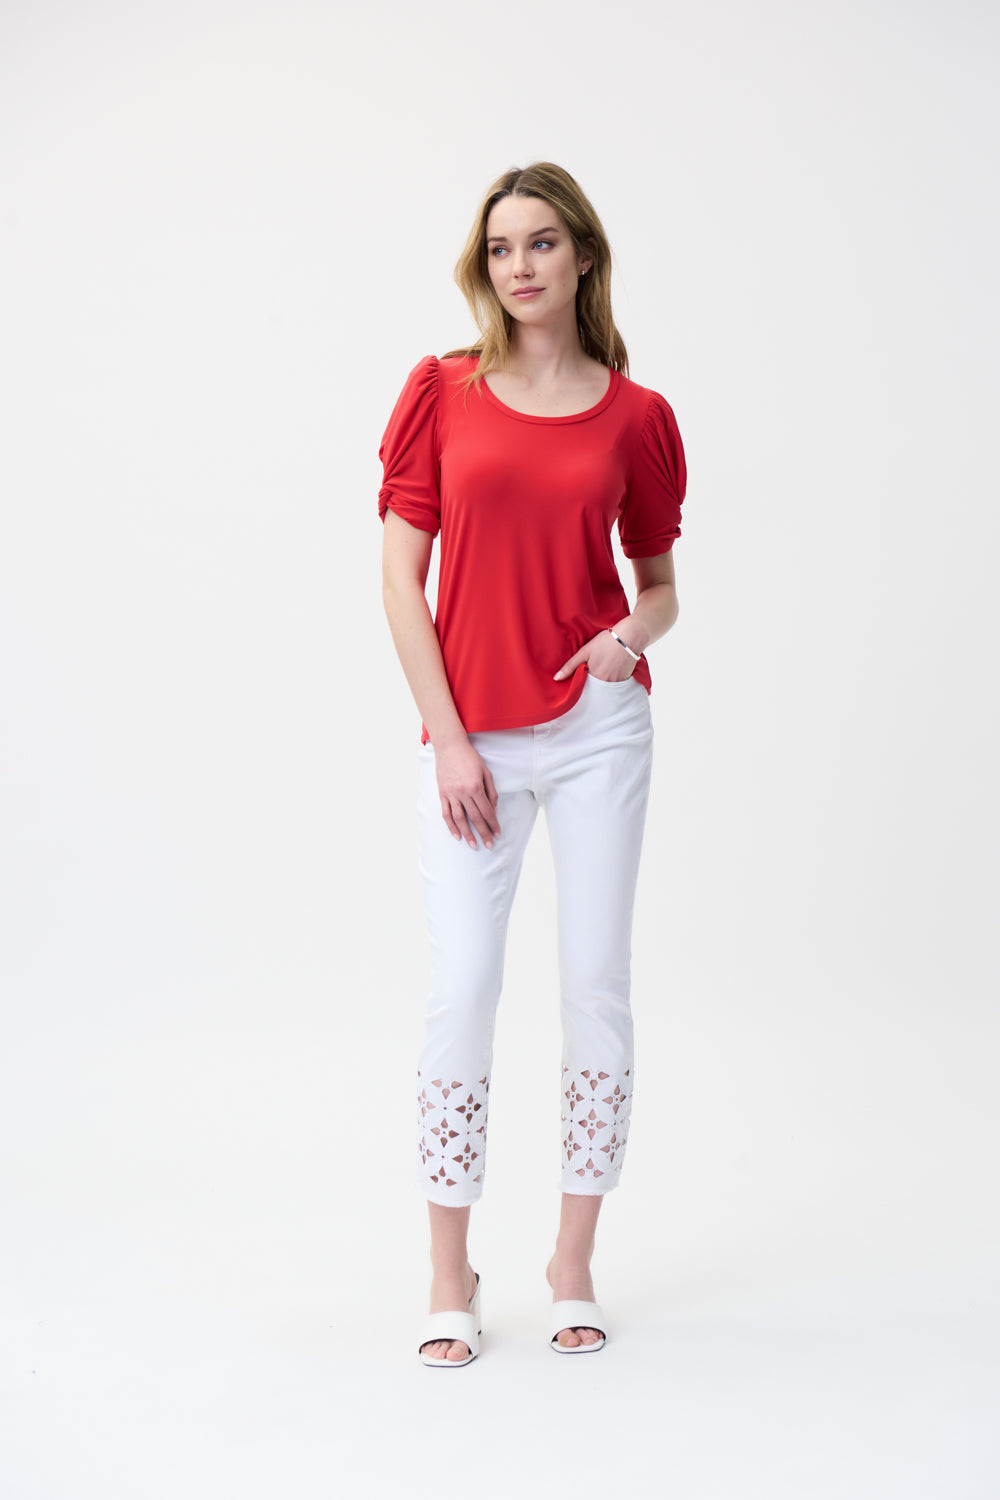 Joseph Ribkoff Lacquer Red Puffed Sleeve Top Style 221157-main